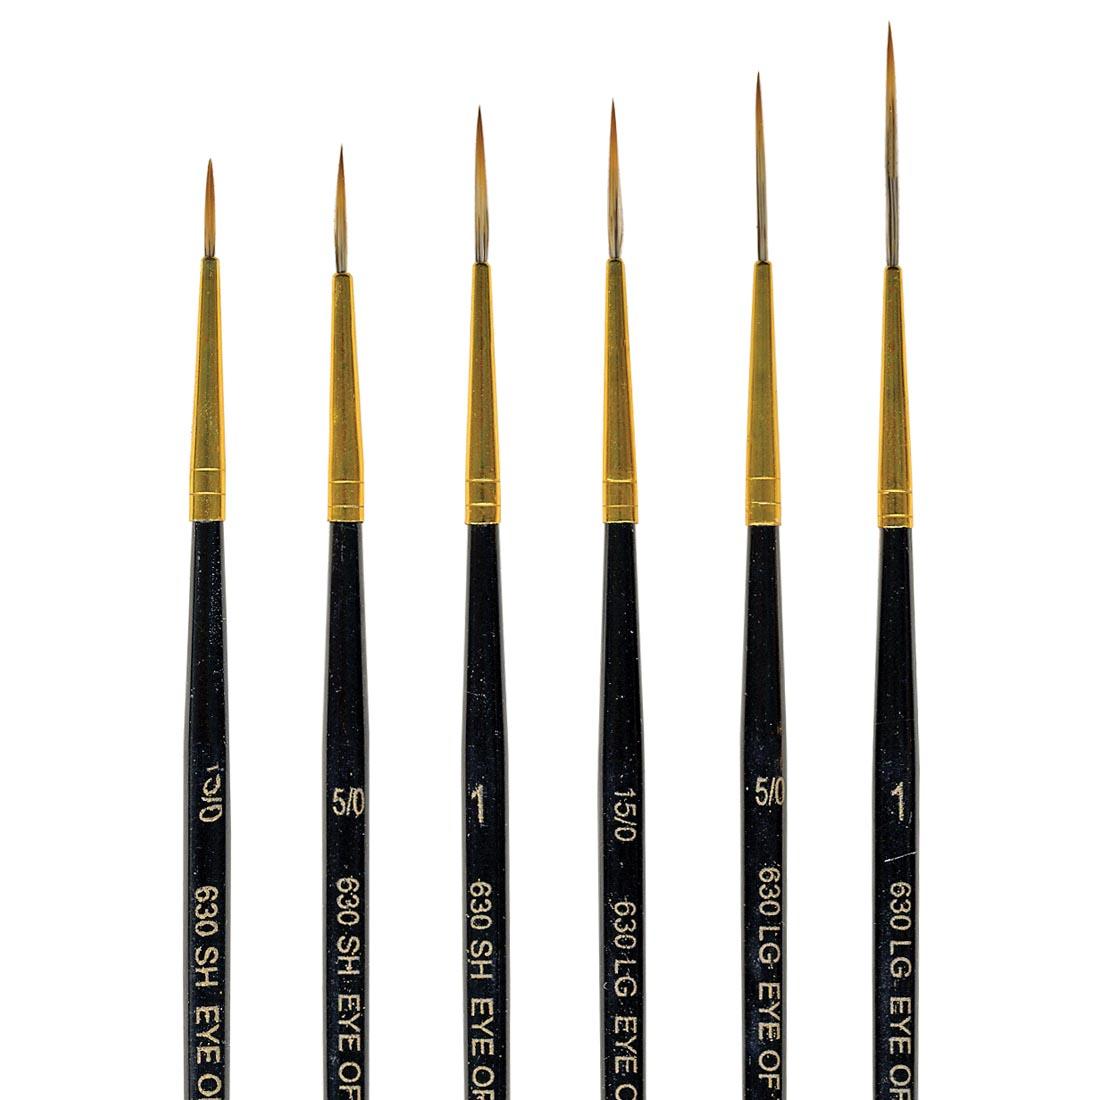 Dynasty Eye of The Tiger Liner Brush Set of Six